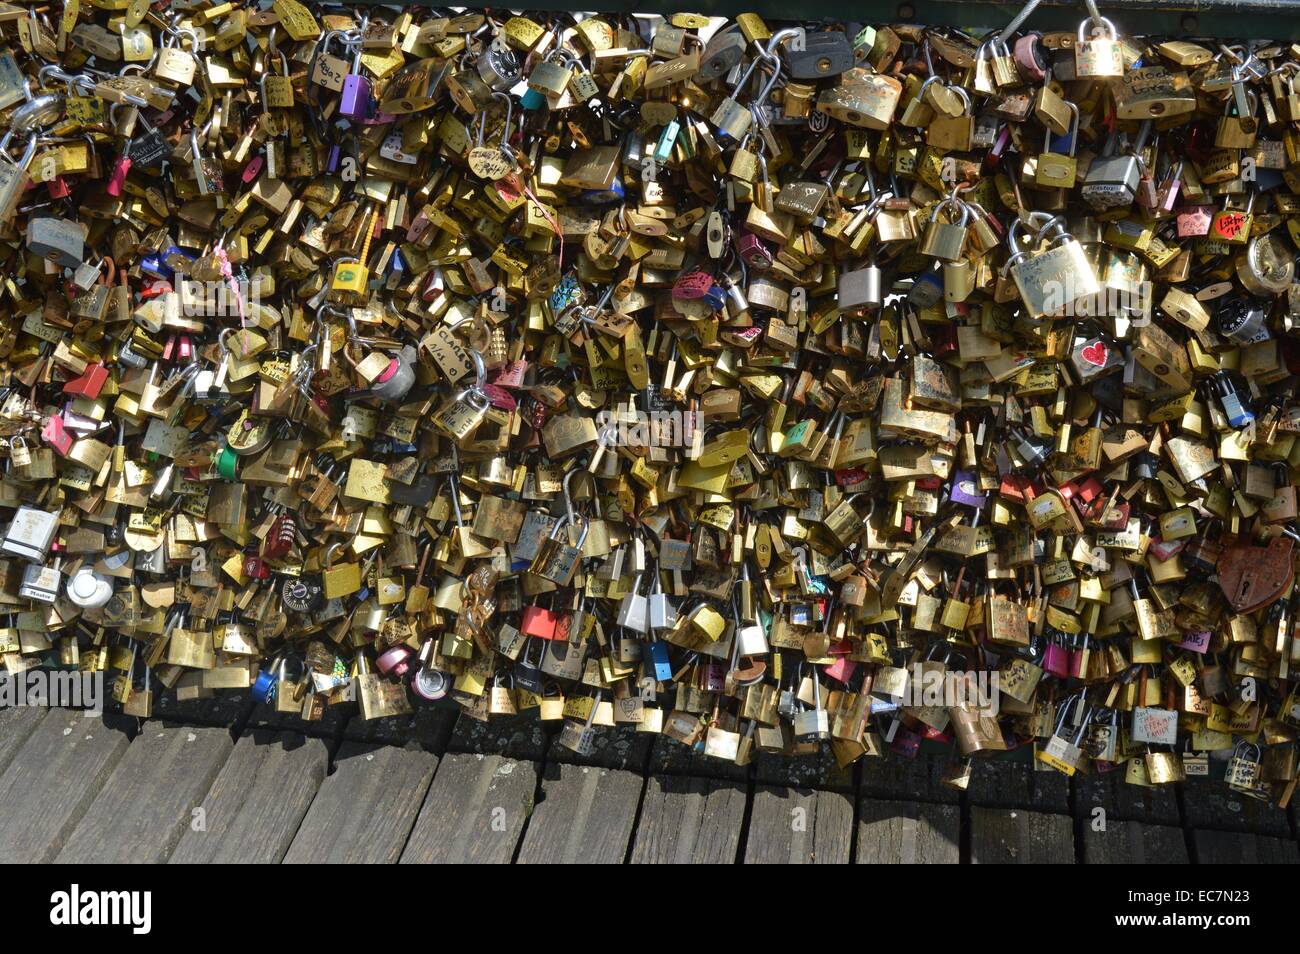 The Pont des Arts or Passerelle des Arts is a pedestrian bridge in Paris which crosses the River Seine. It links the Institut de France and the central square (cour carrée) of the Palais du Louvre. couples have taken to attaching padlocks (love locks) with their first names written or engraved Stock Photo